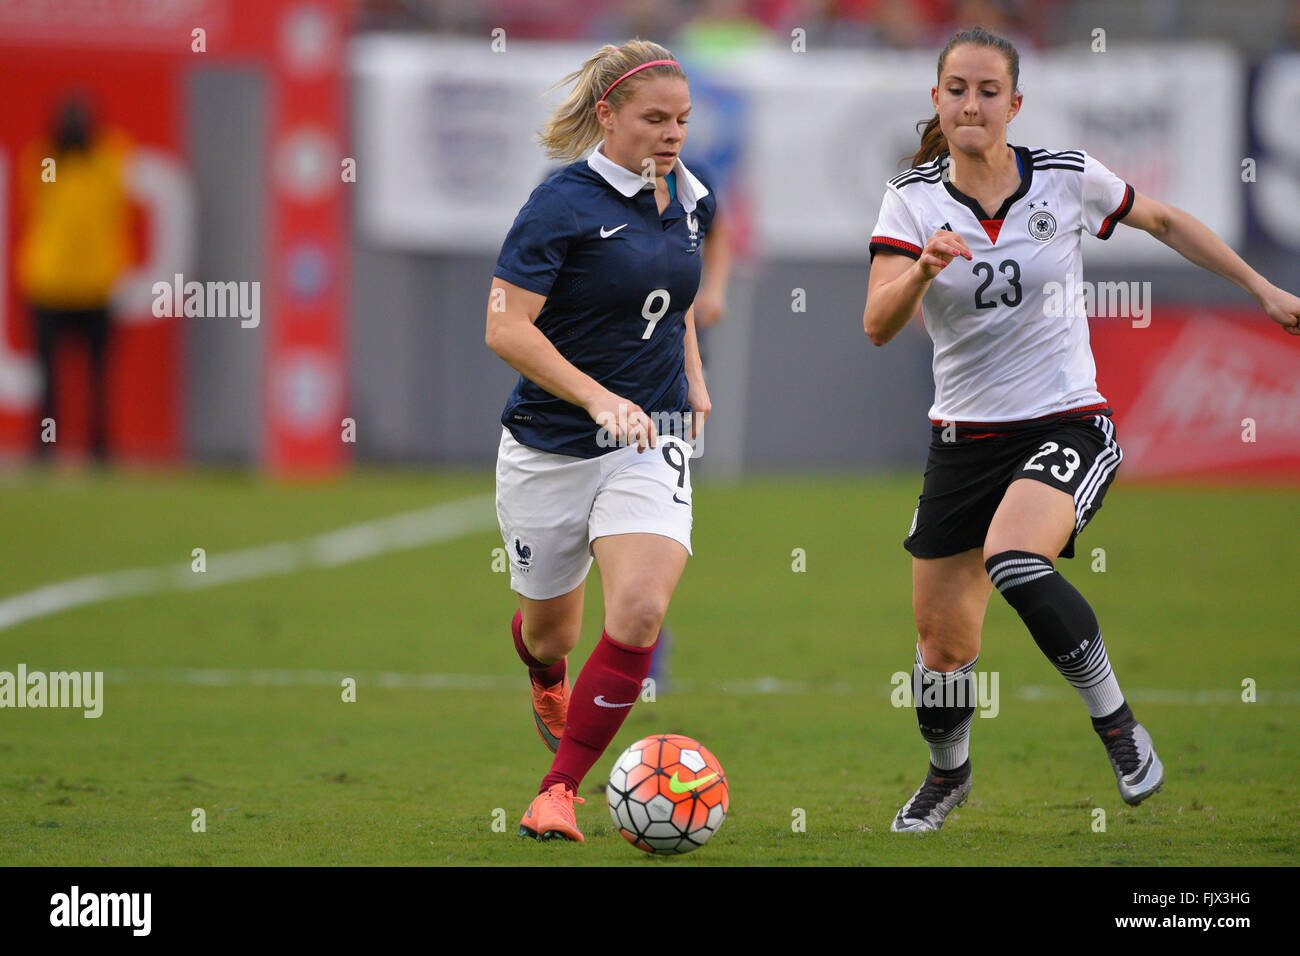 Tampa, Florida, USA. 3rd Mar, 2016. French forward Eugenie Le Sommer (9) brings the ball upfield against Germany midfielder Sara Dabritz (23) during the She Believes Cup at Raymond James Stadium on March 3, 2016 in Tampa, Florida. Germany won the game 1-0. © Scott A. Miller/ZUMA Wire/Alamy Live News Stock Photo